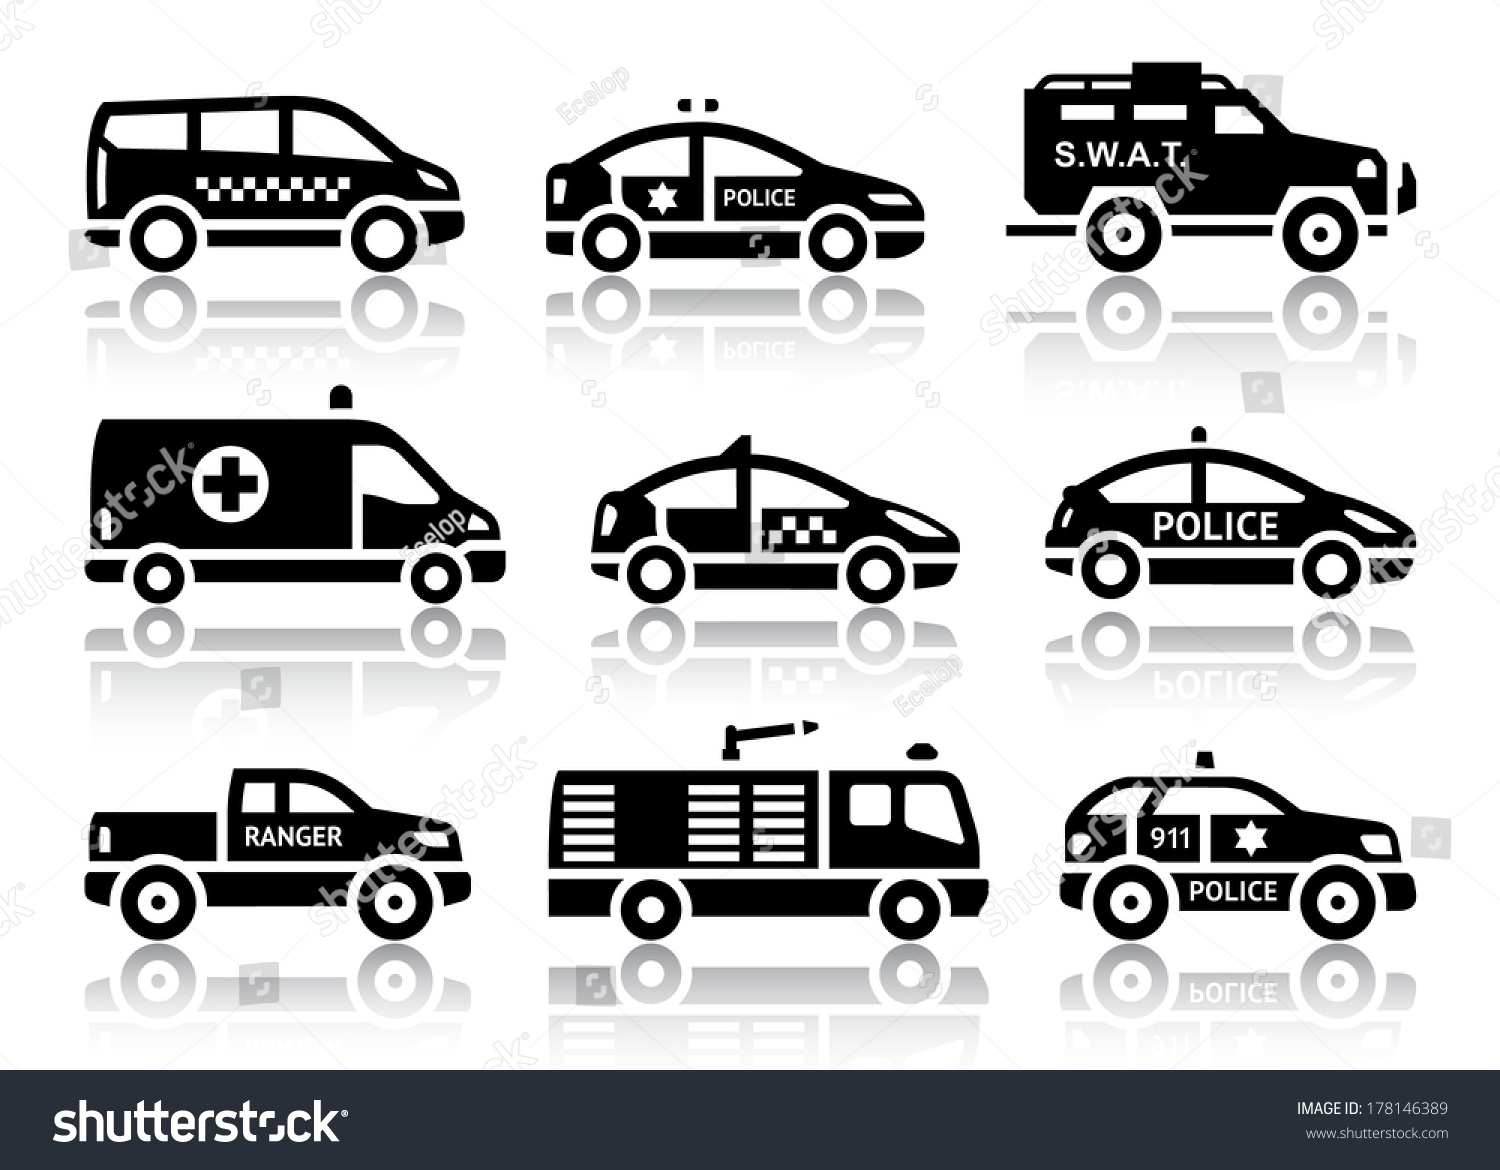 SVG of Set of service automobiles black icons with reflection, vector illustrations svg